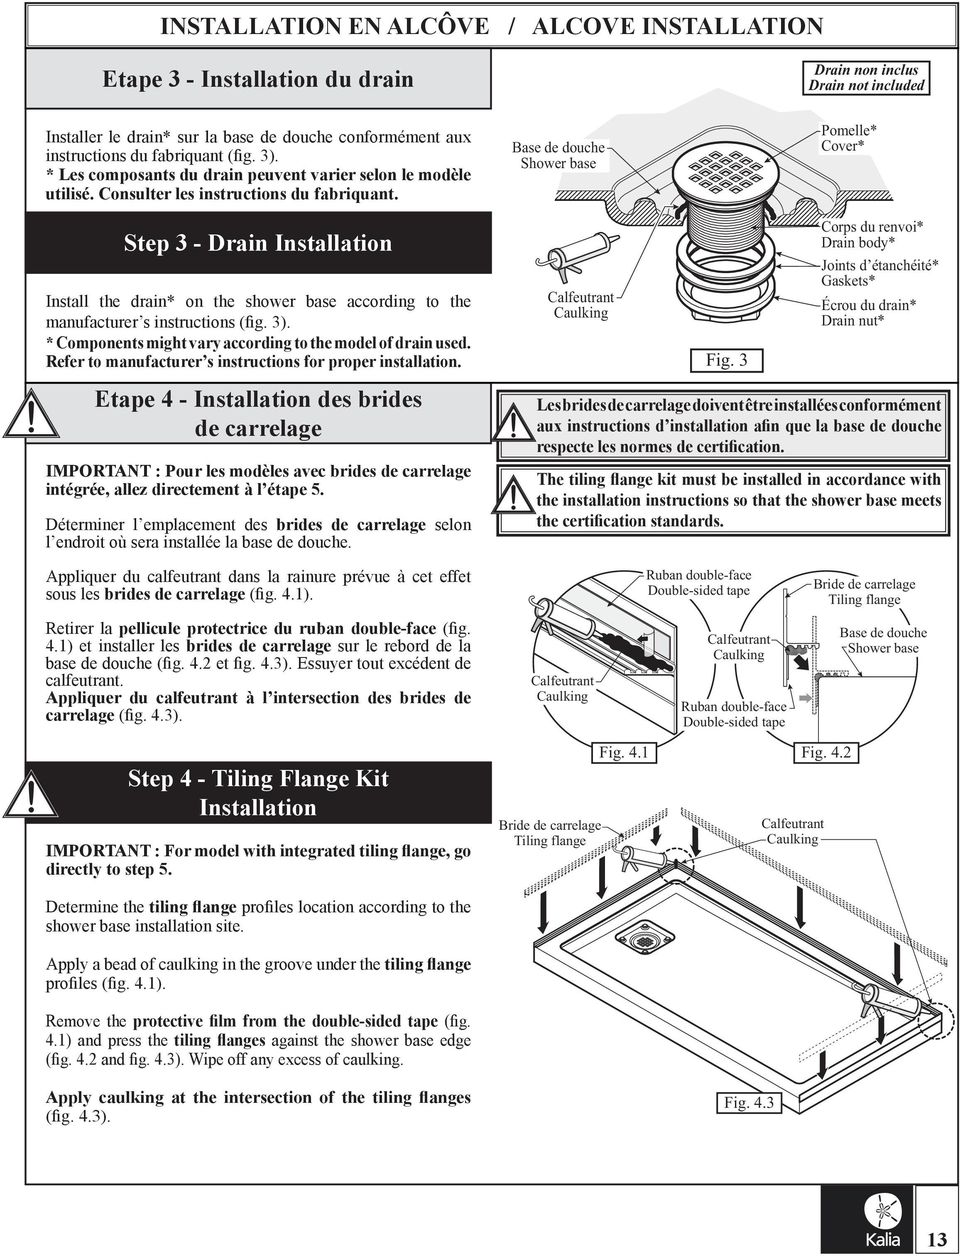 Base de douche Shower base Pomelle* Cover* Step 3 - Drain Installation Install the drain* on the shower base according to the manufacturer s instructions (fig. 3).